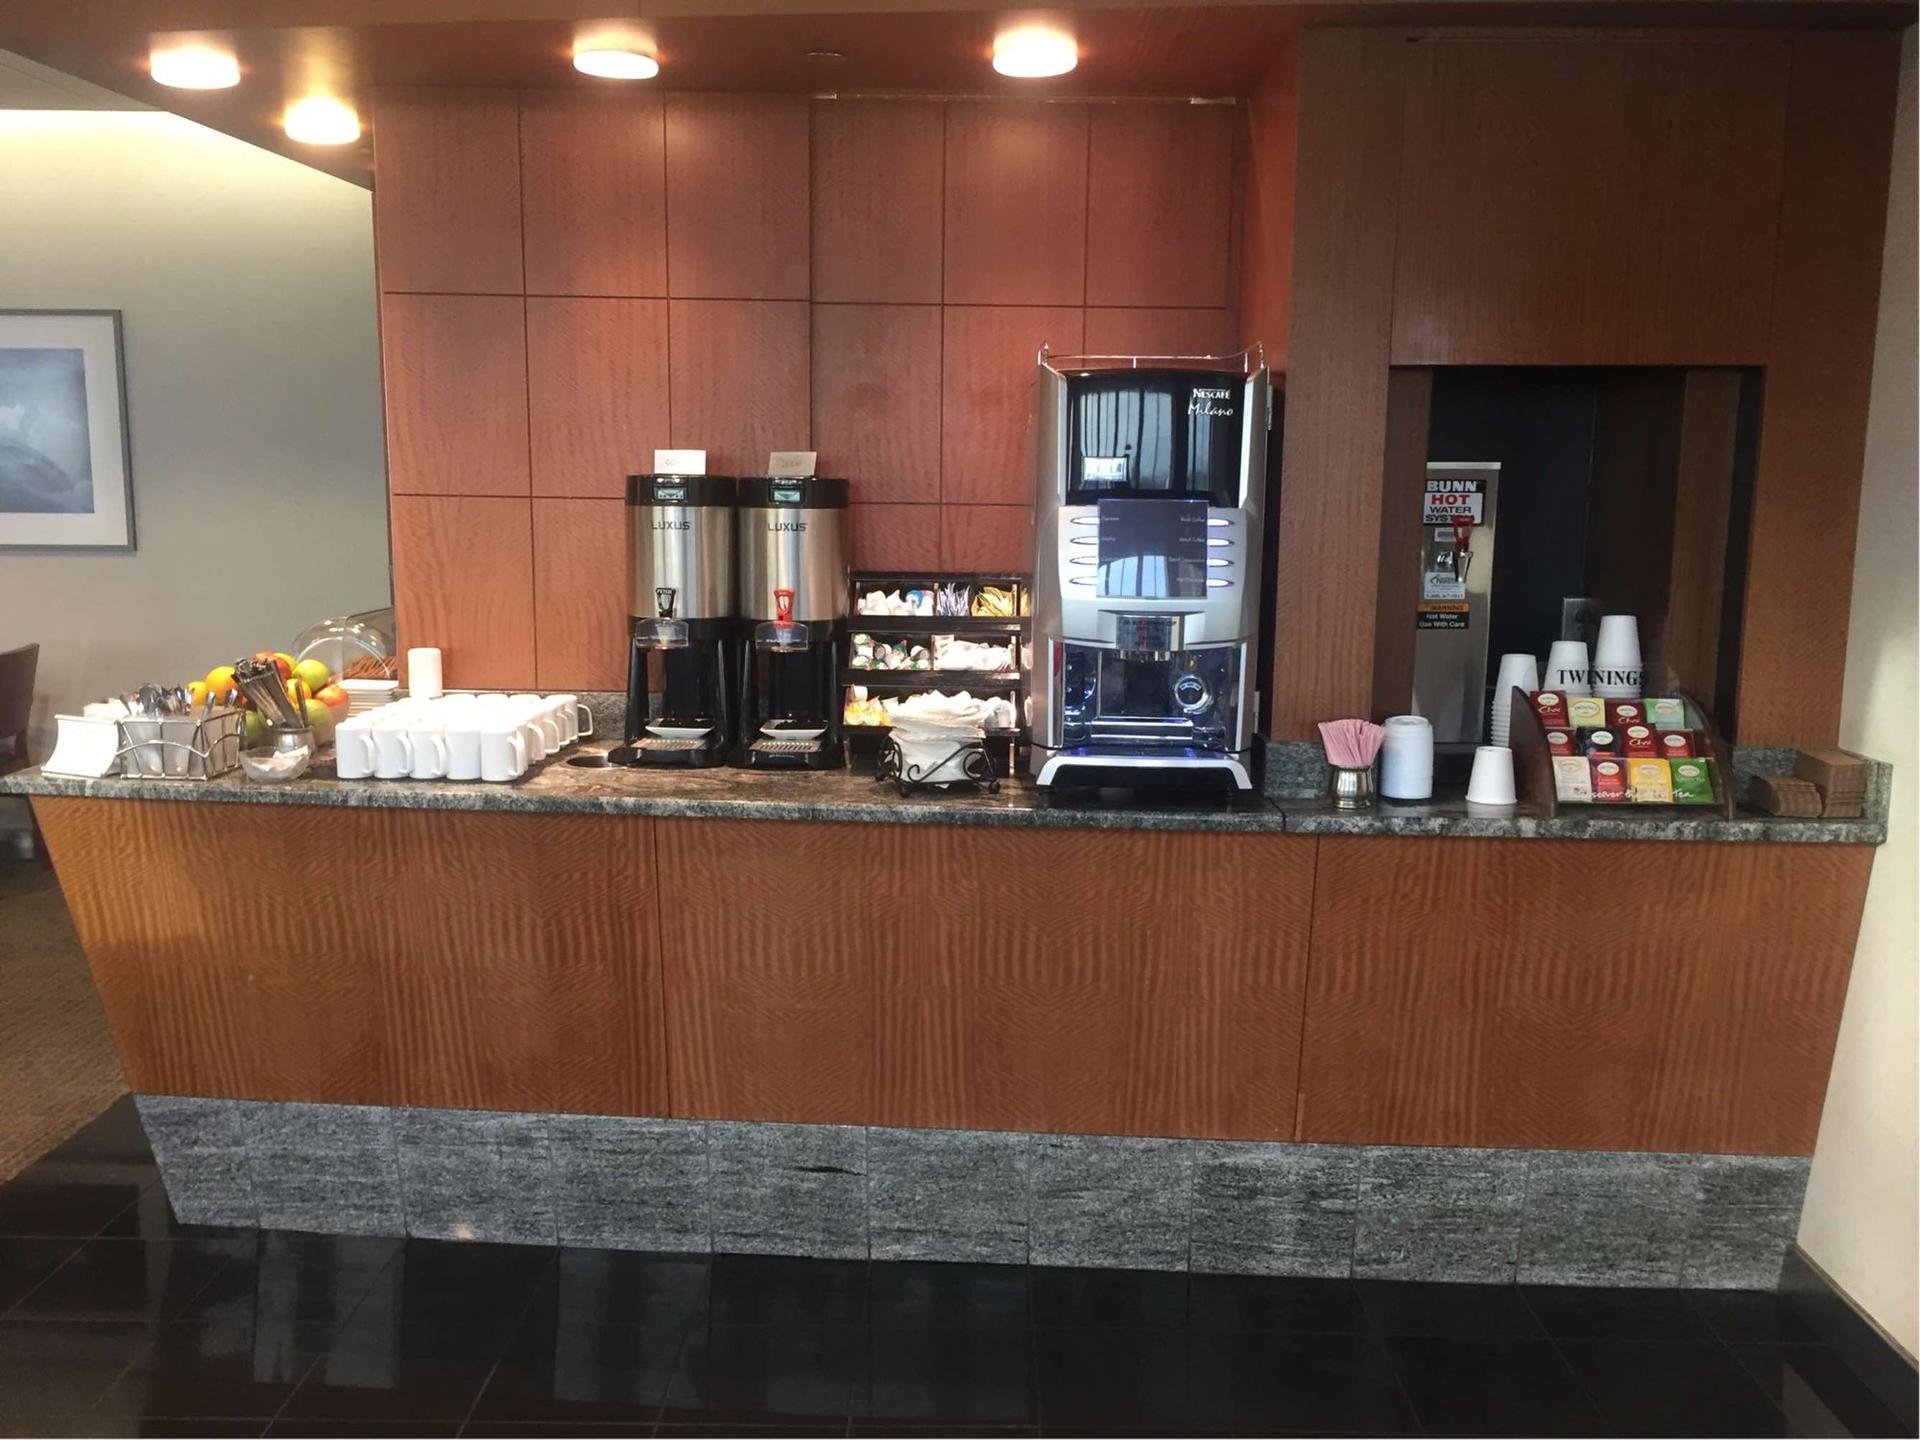 American Airlines Admirals Club image 31 of 48